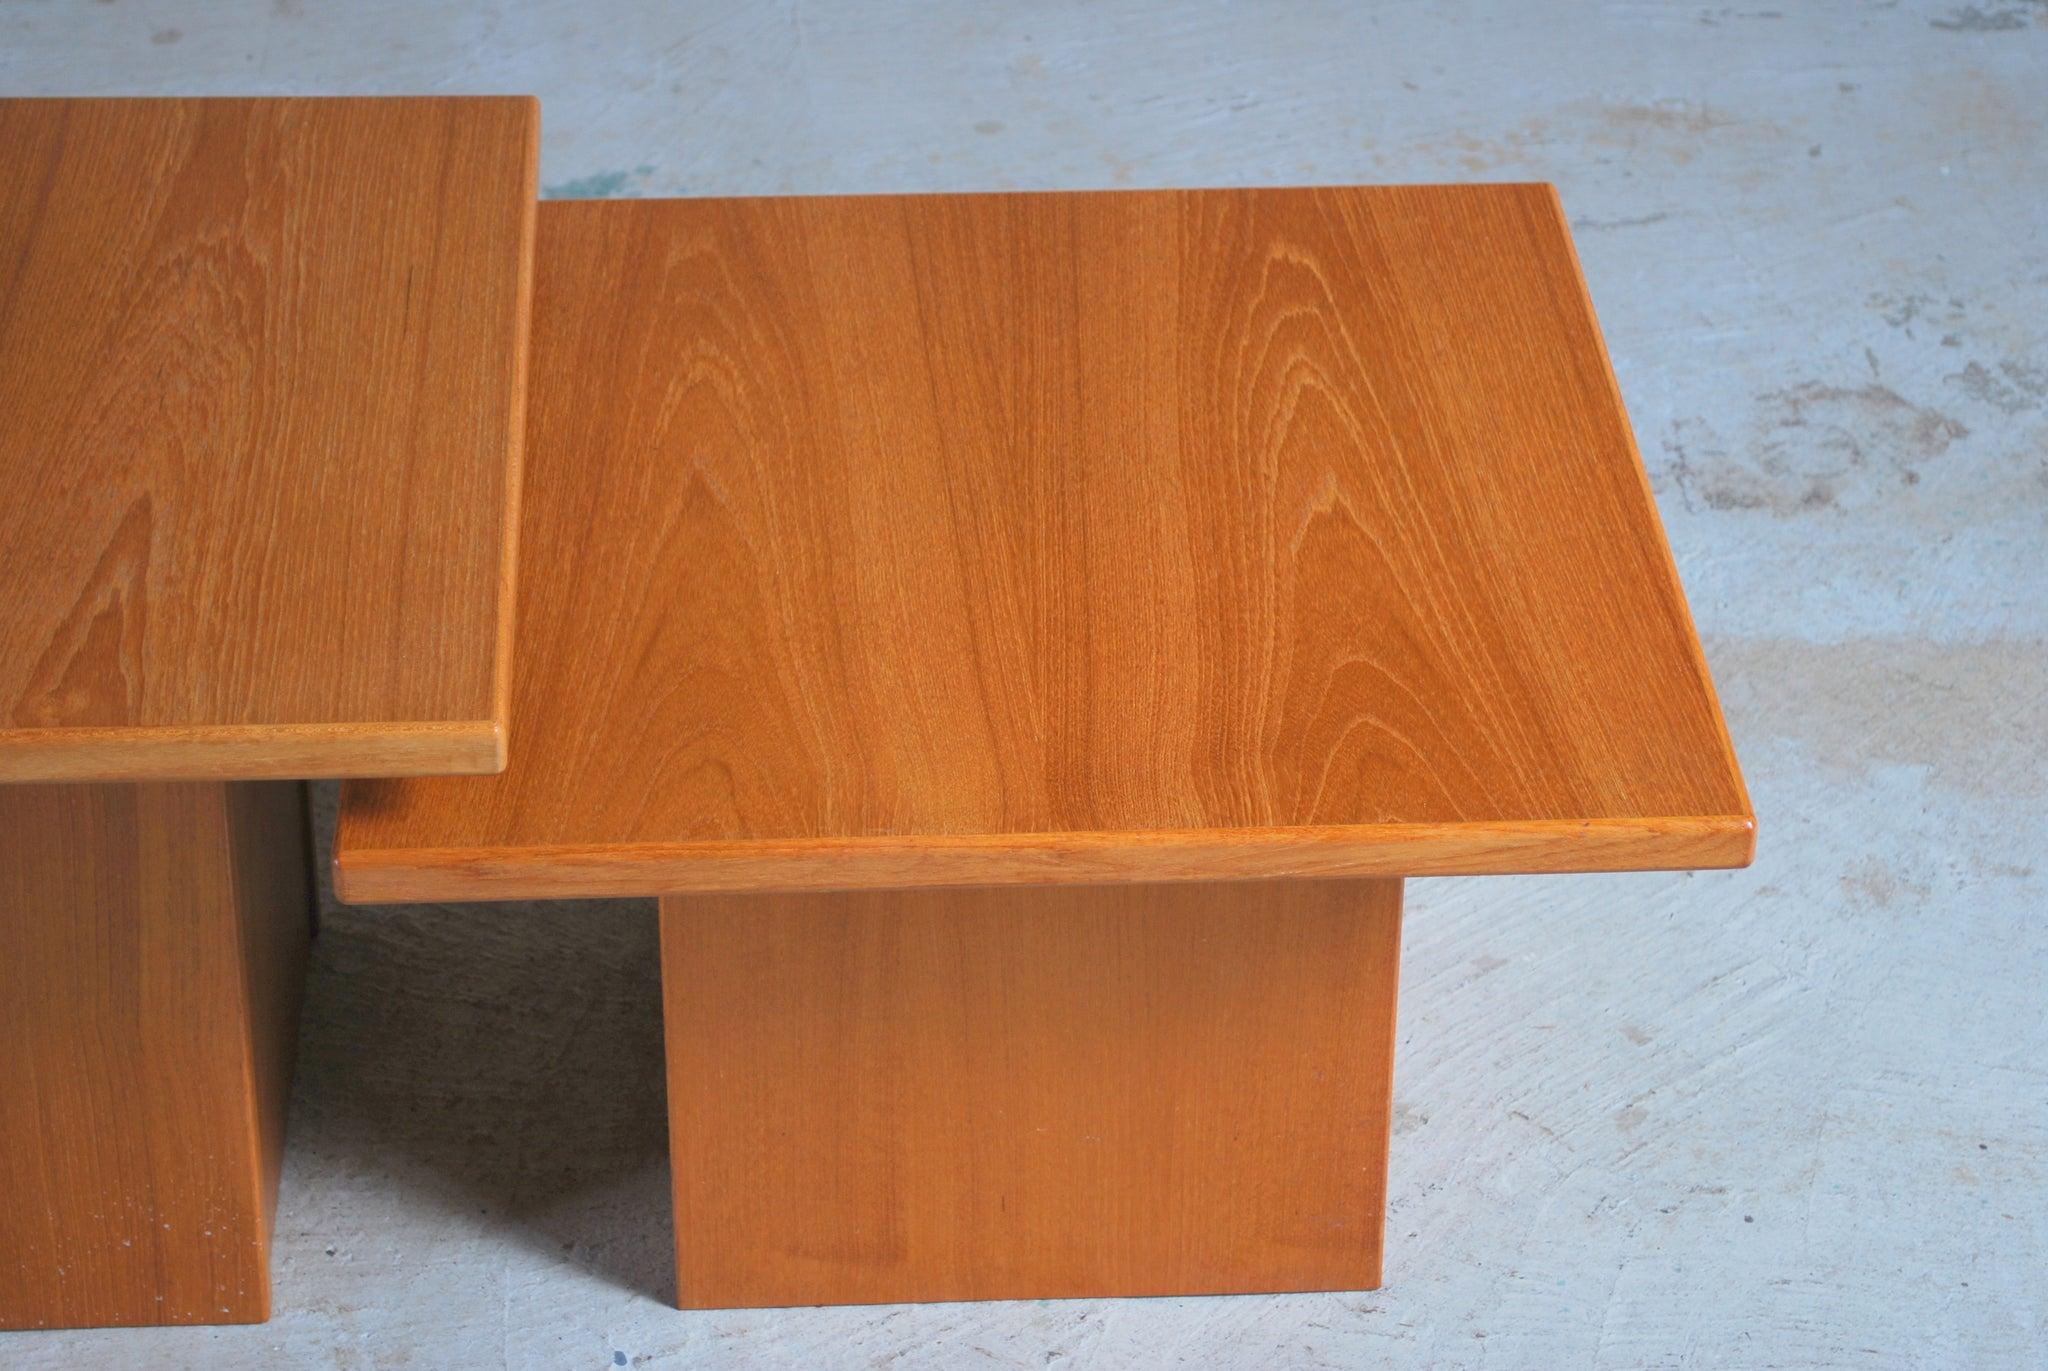 Set of 3 Danish mid century tables / nesting tables by Gangso, circa 1970s. Very good vintage condition.

Dimension: W 58cm x D 58cm x H 35/41/47cm.